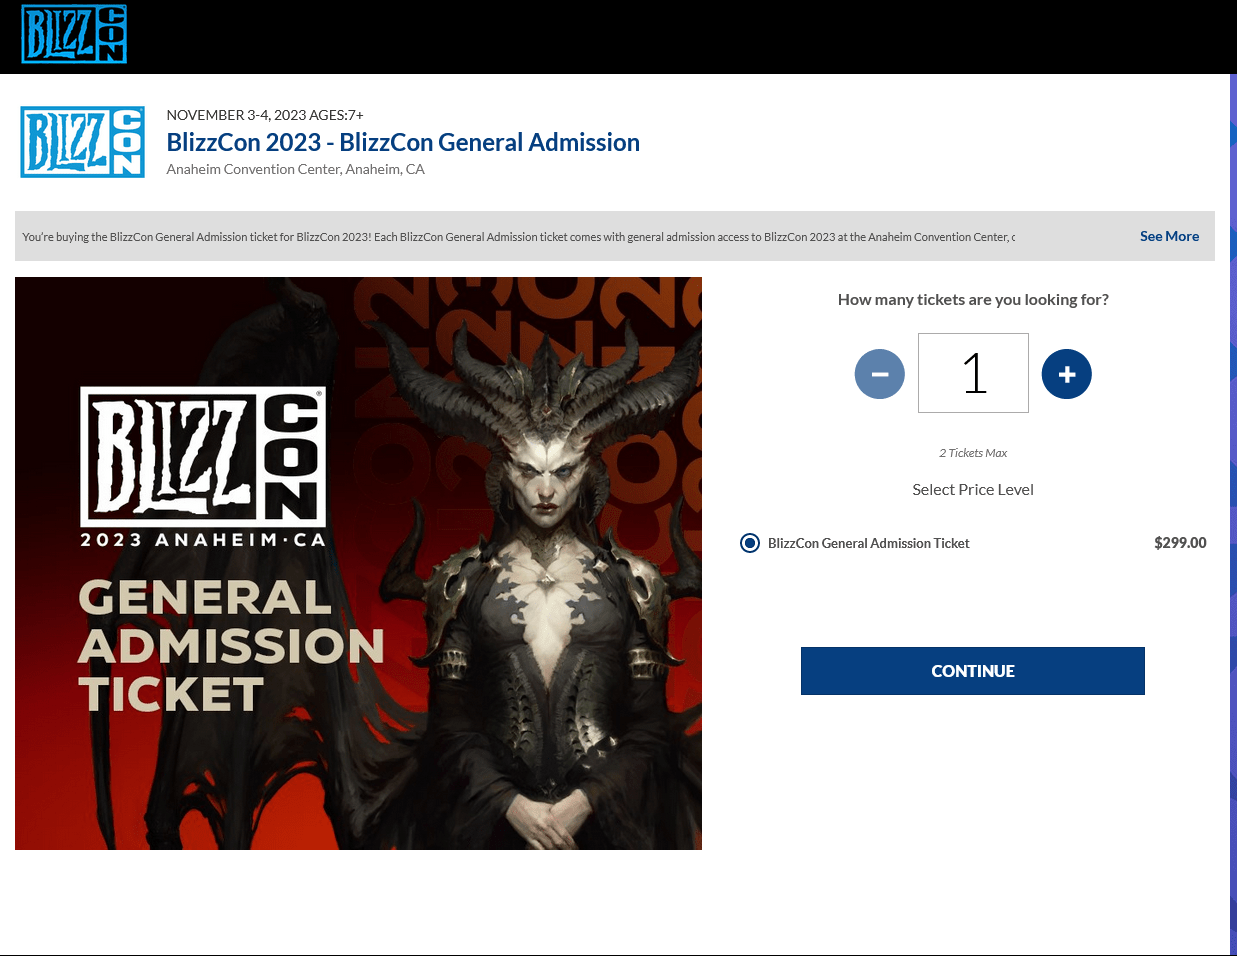 BlizzCon 2023 tickets still haven't sold out, but is it really a